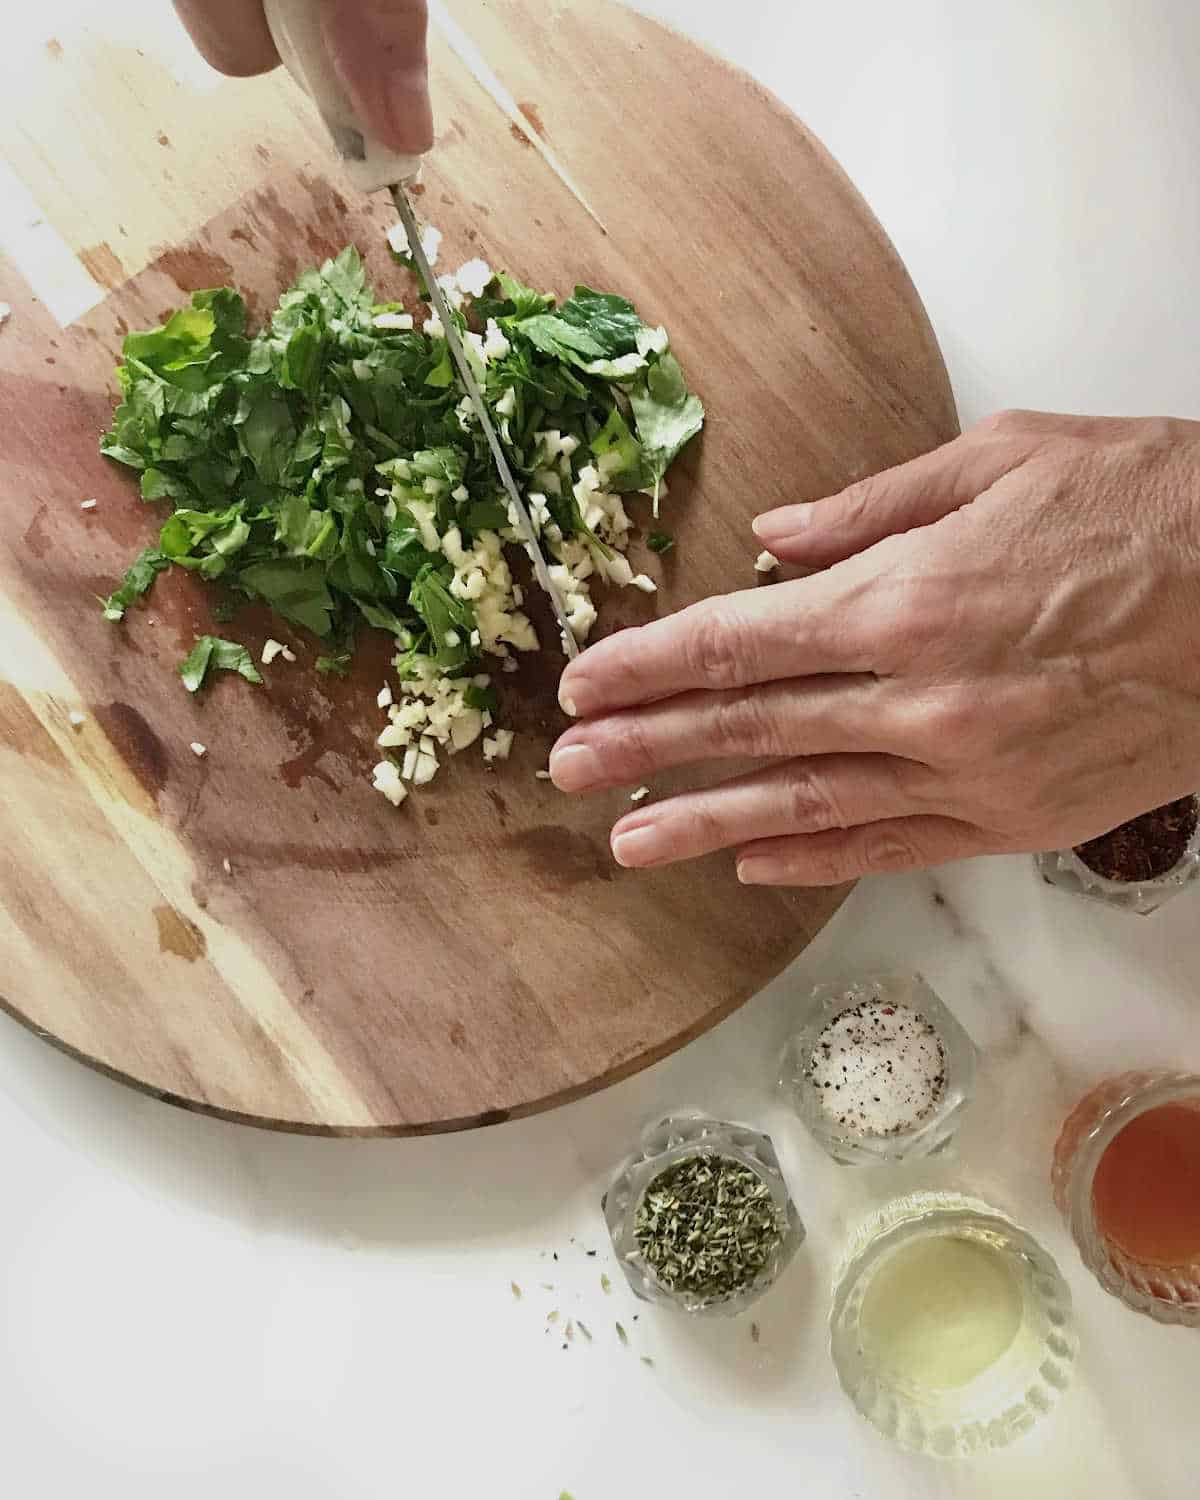 Hands chopping parsley and garlic on a wooden board, white surface with other ingredients in containers.